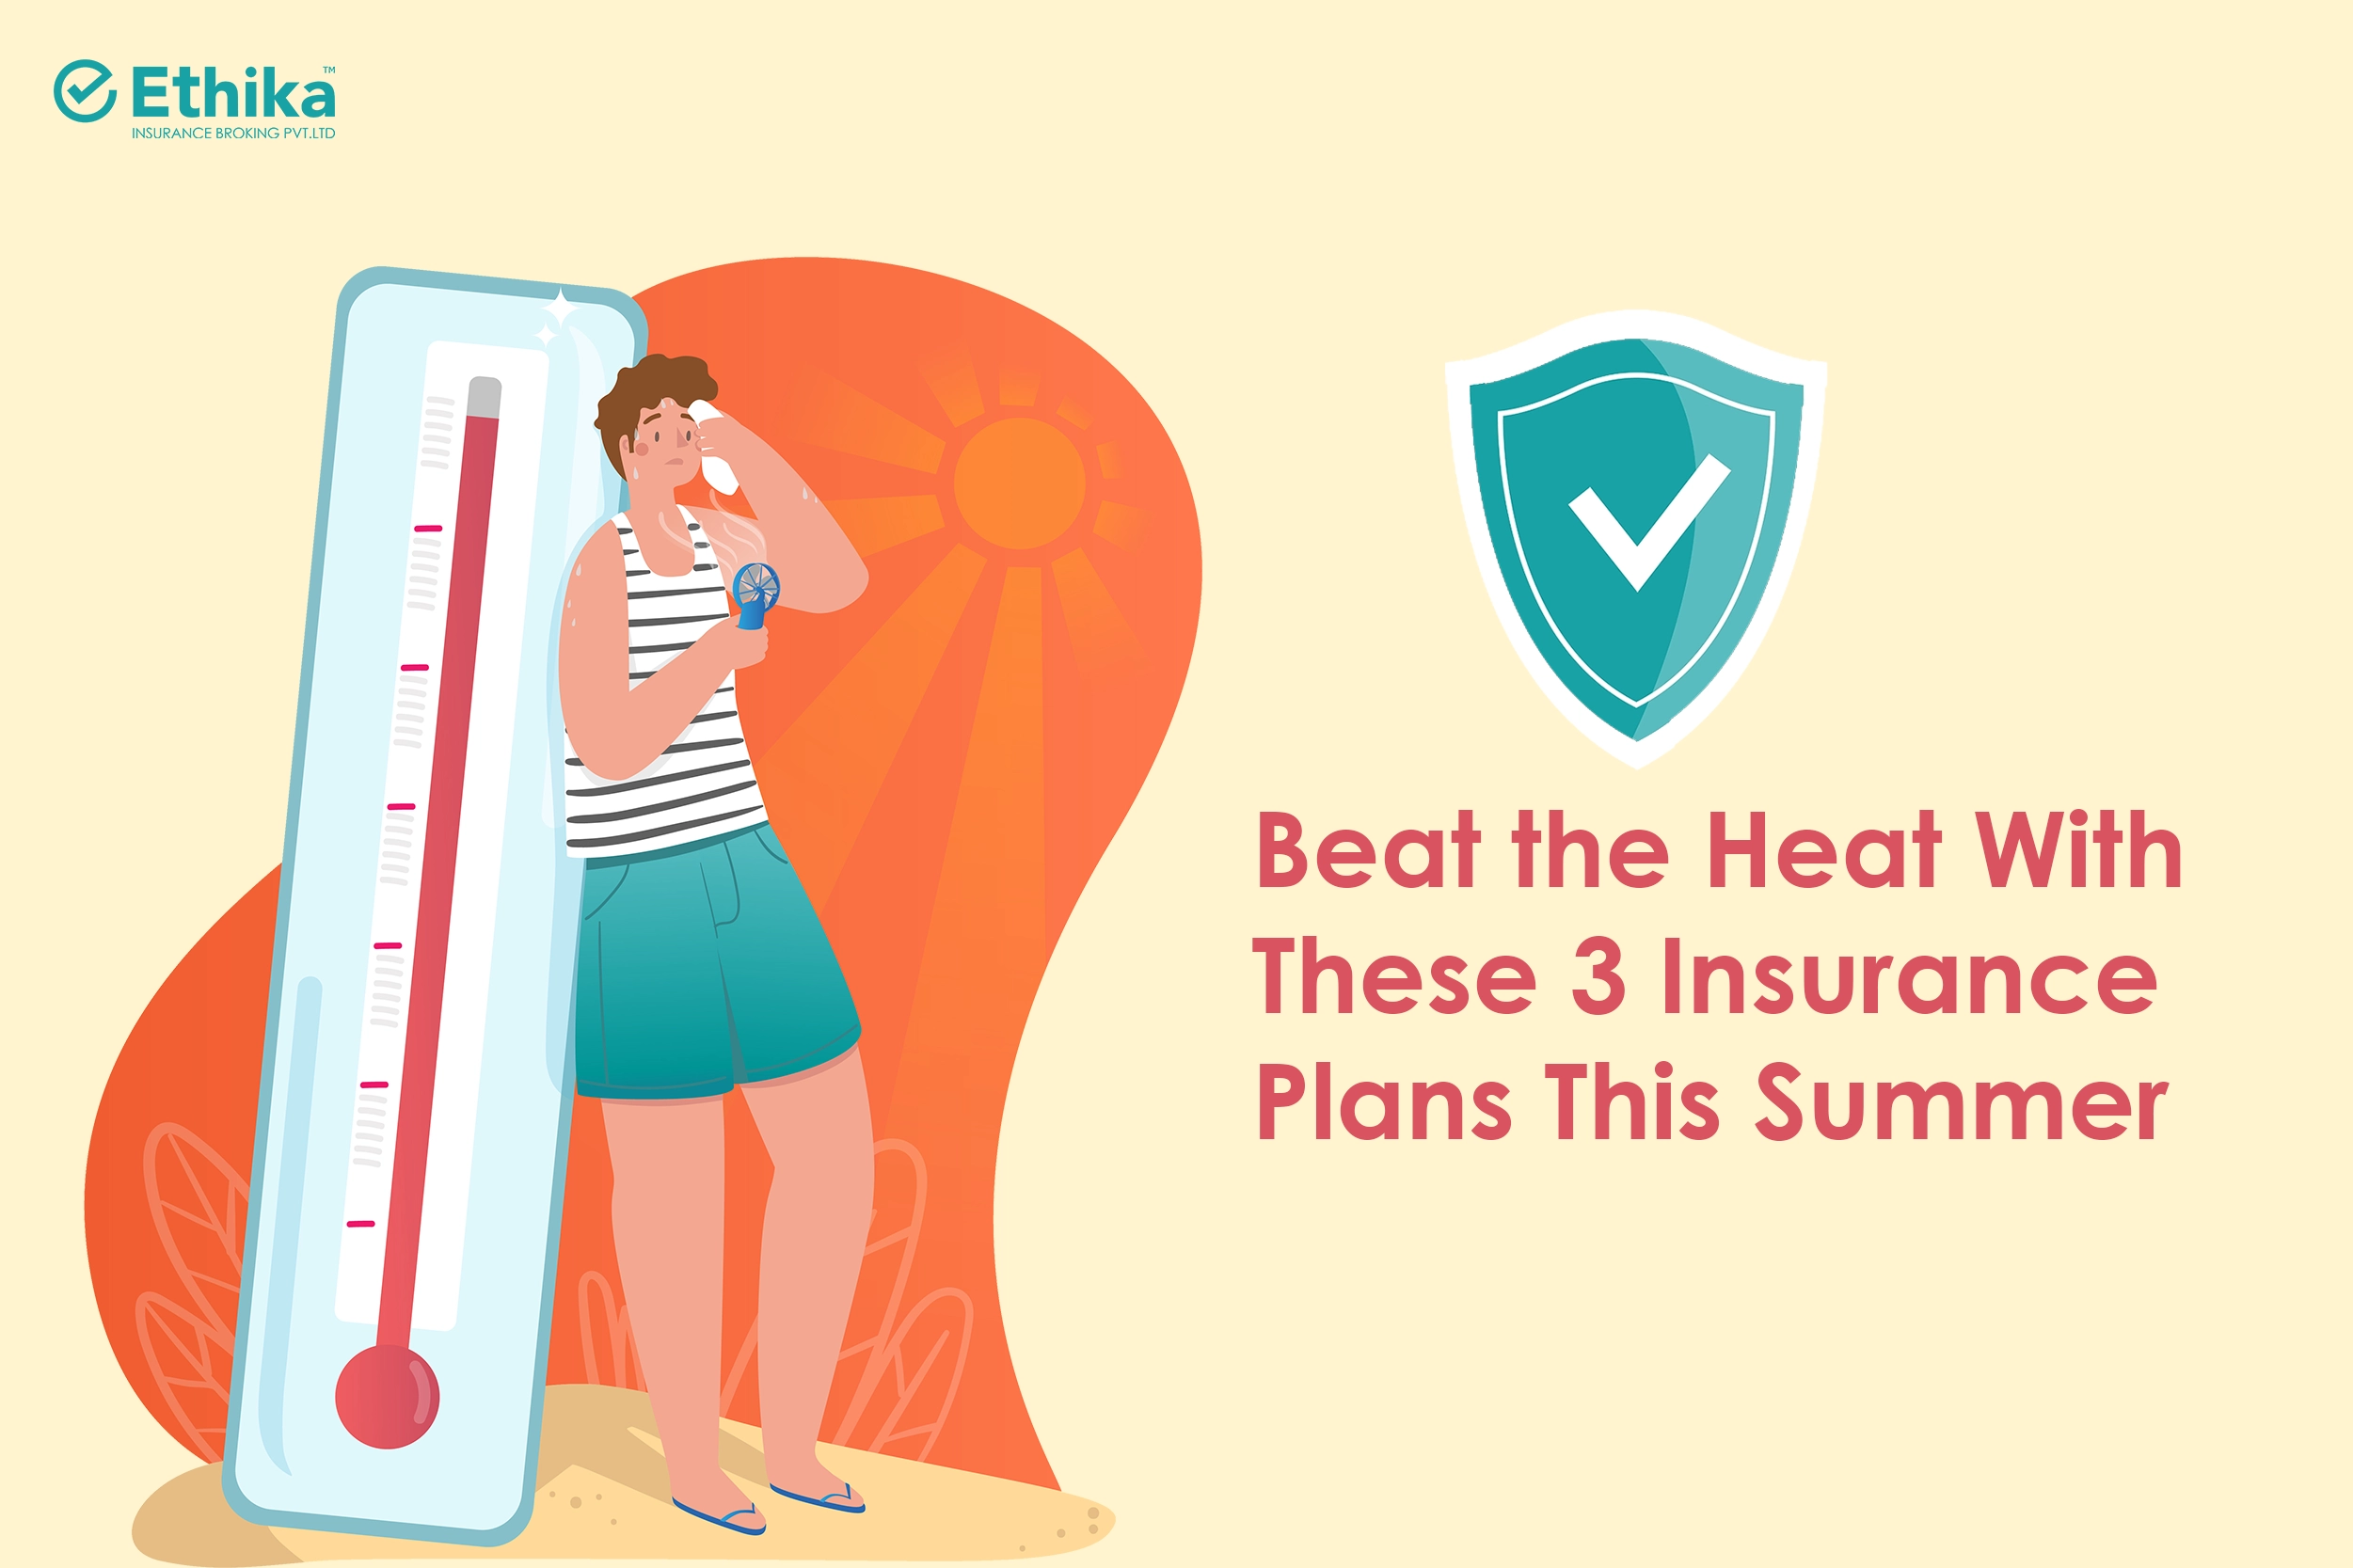 Beat the heat with these 3 insurance plans this summer